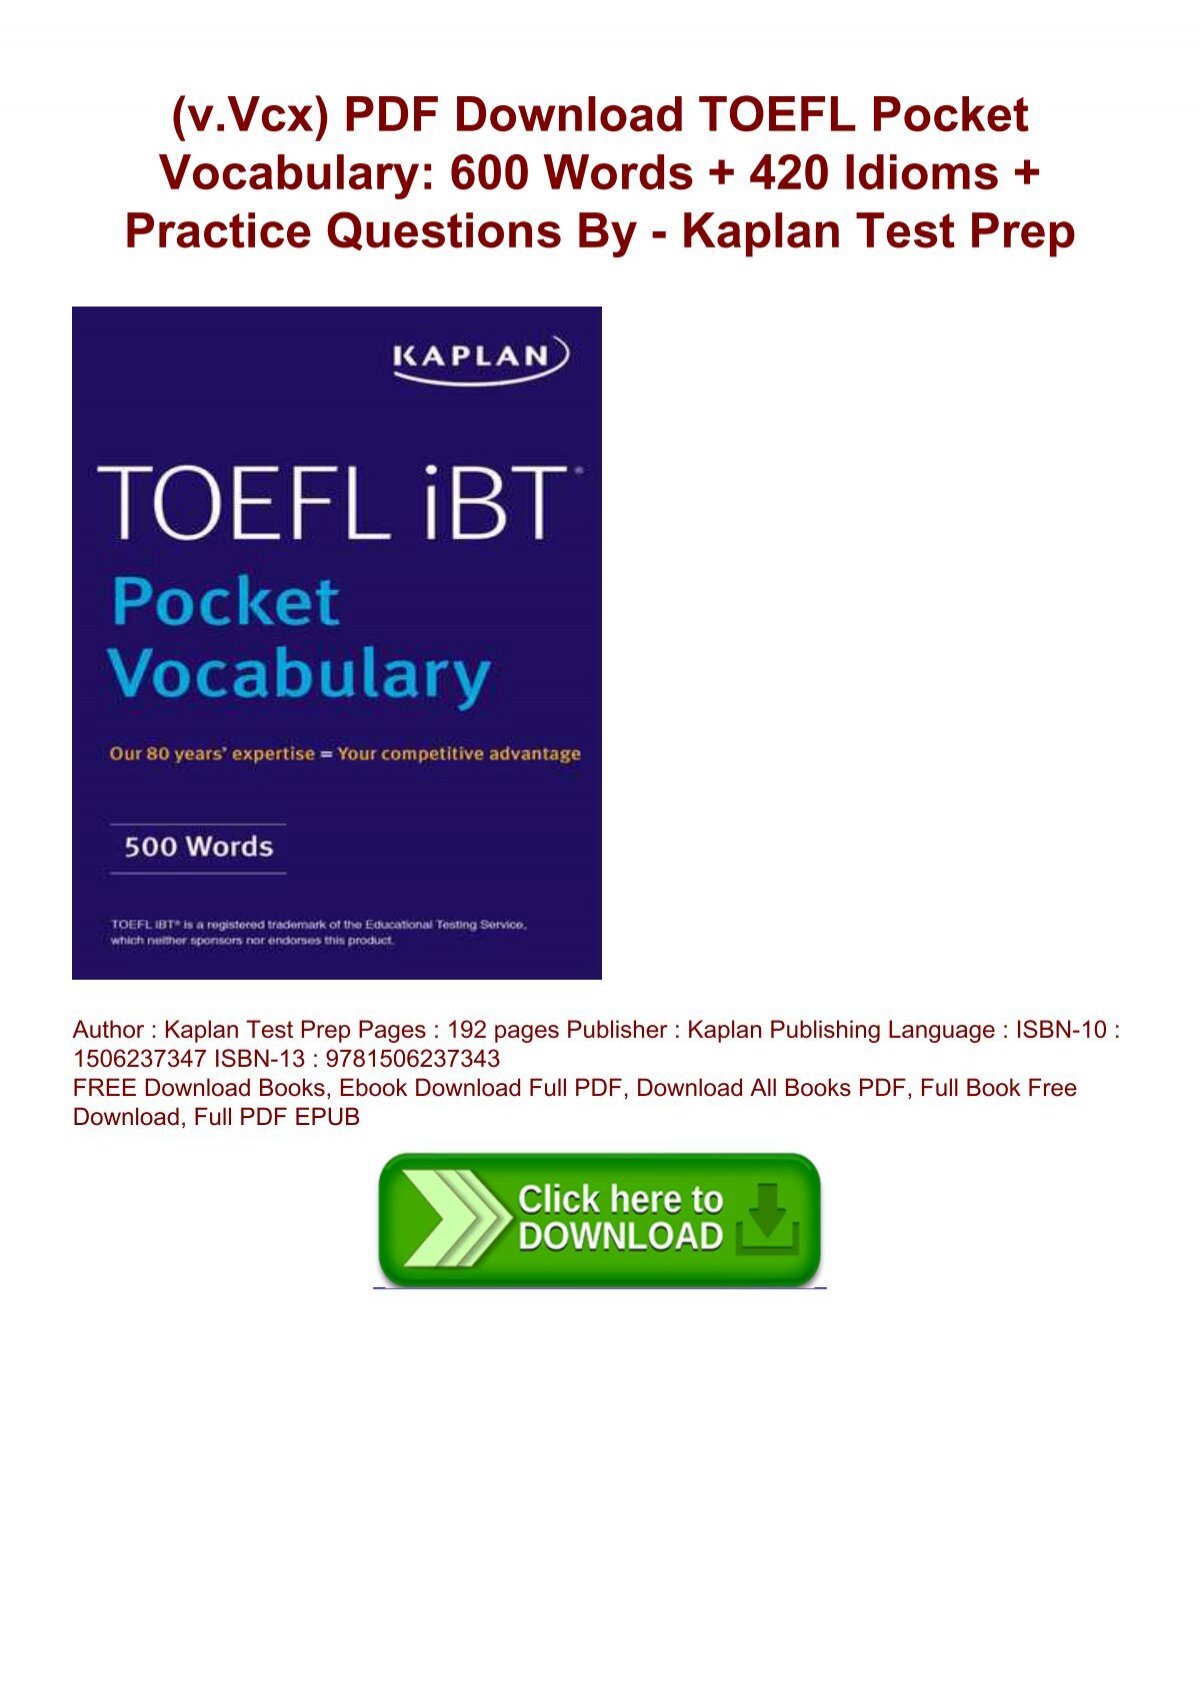 V Vcx Pdf Download Toefl Pocket Vocabulary 600 Words 420 Idioms Practice Questions By Kaplan Test Prep